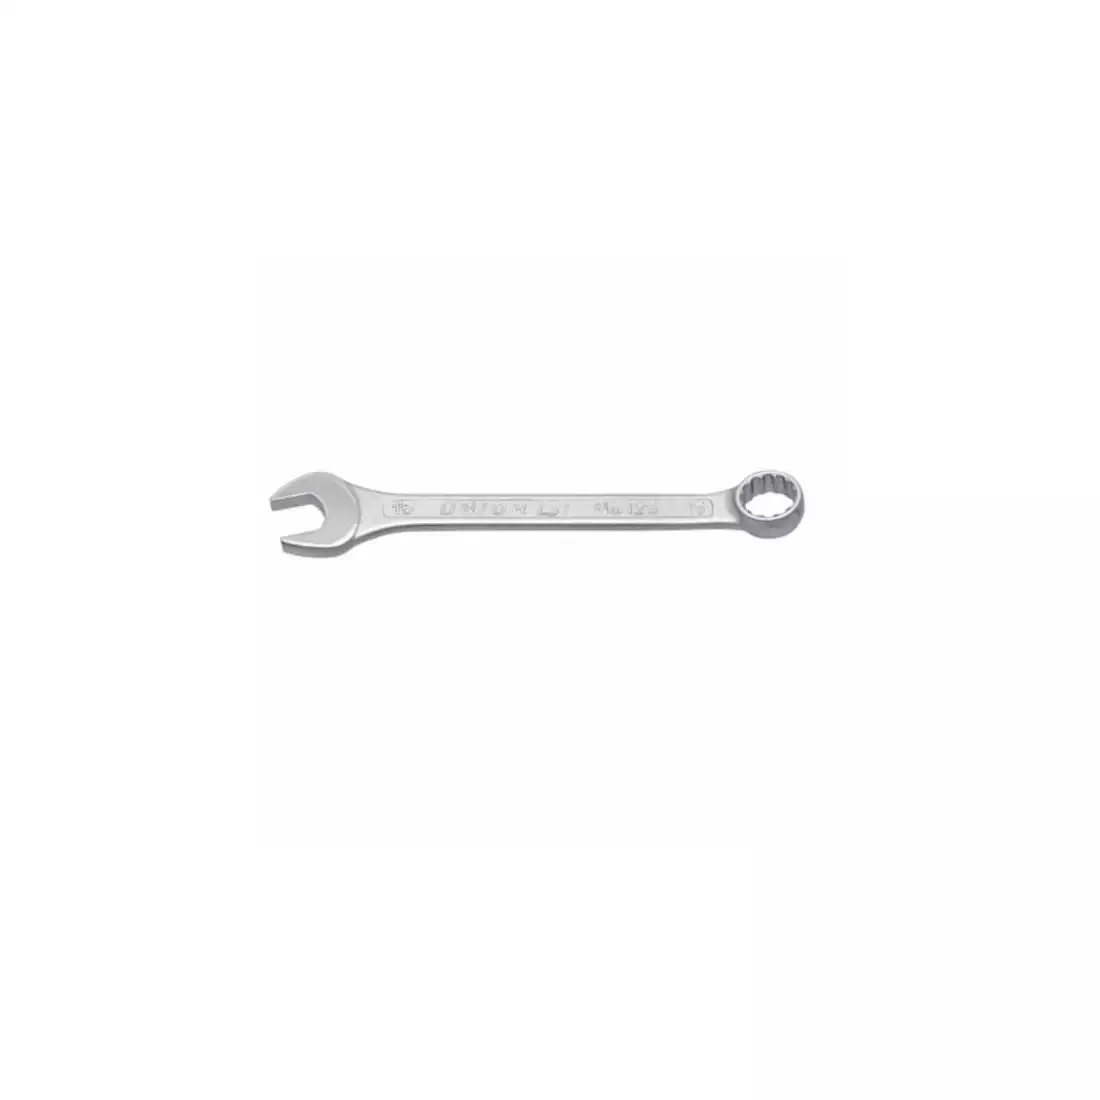 UNIOR combination wrench, short type 18 mm